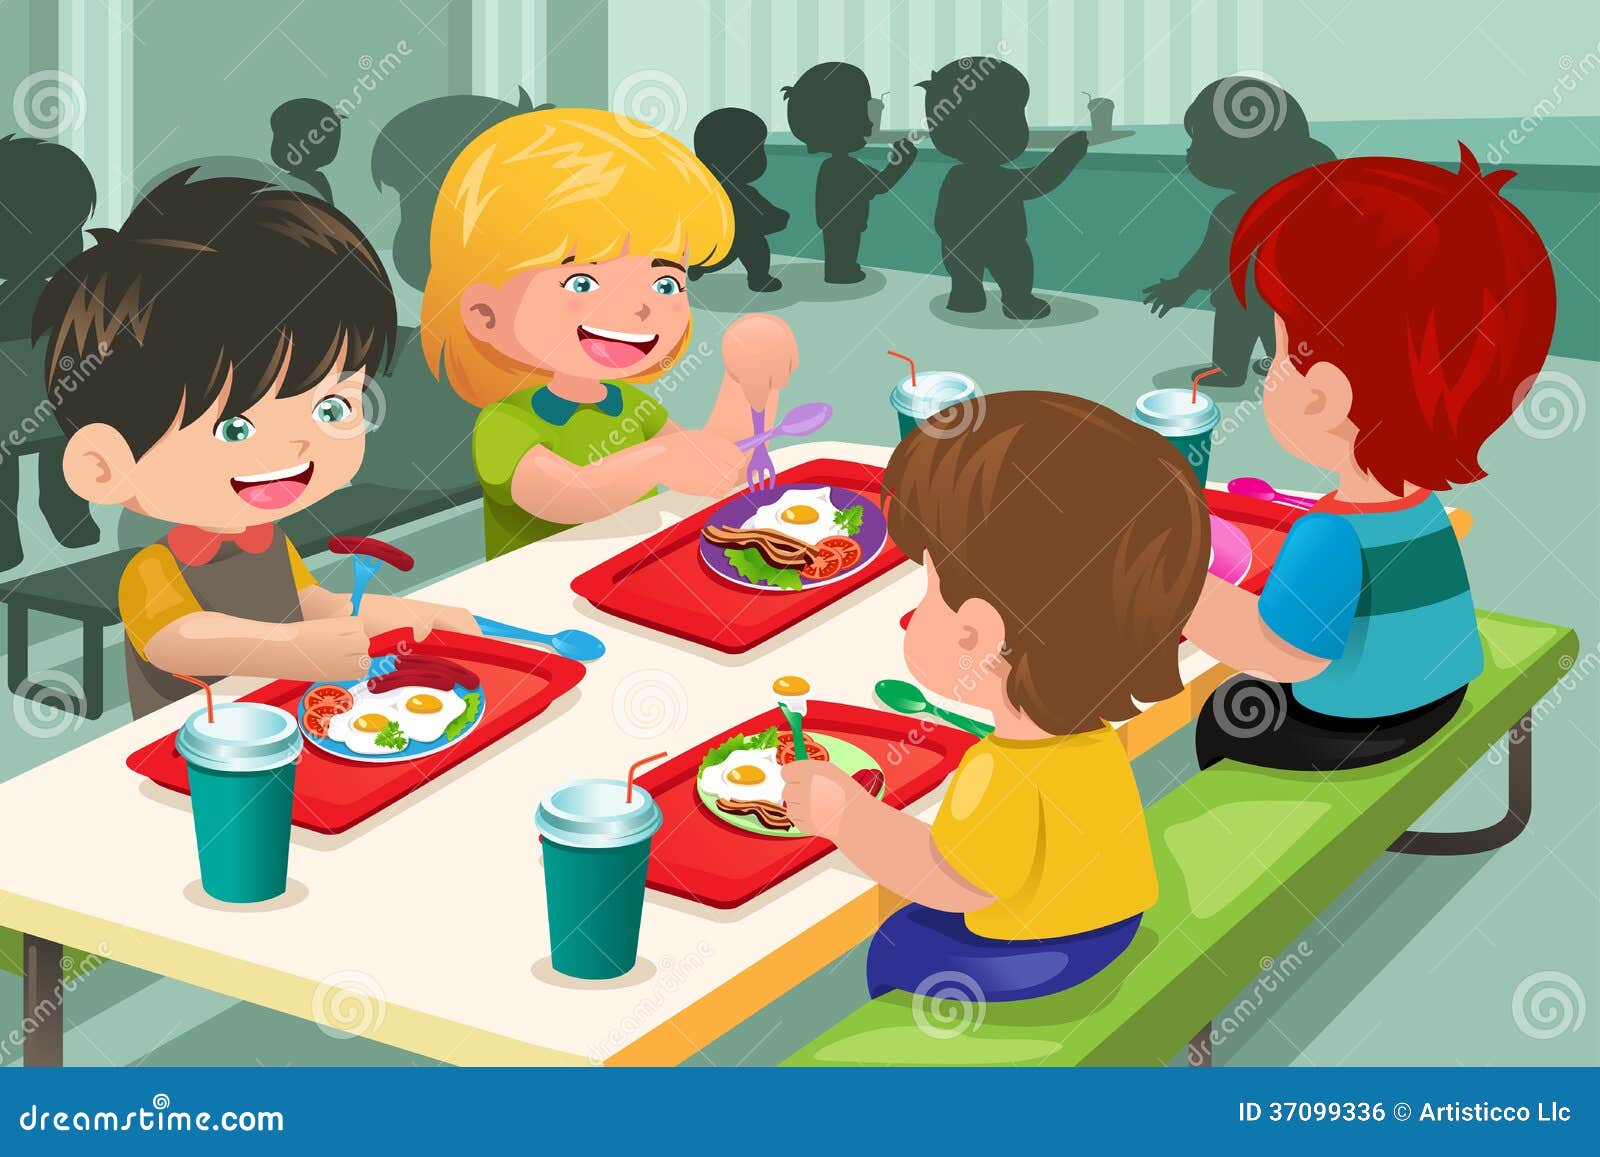 free clipart school cafeteria - photo #38